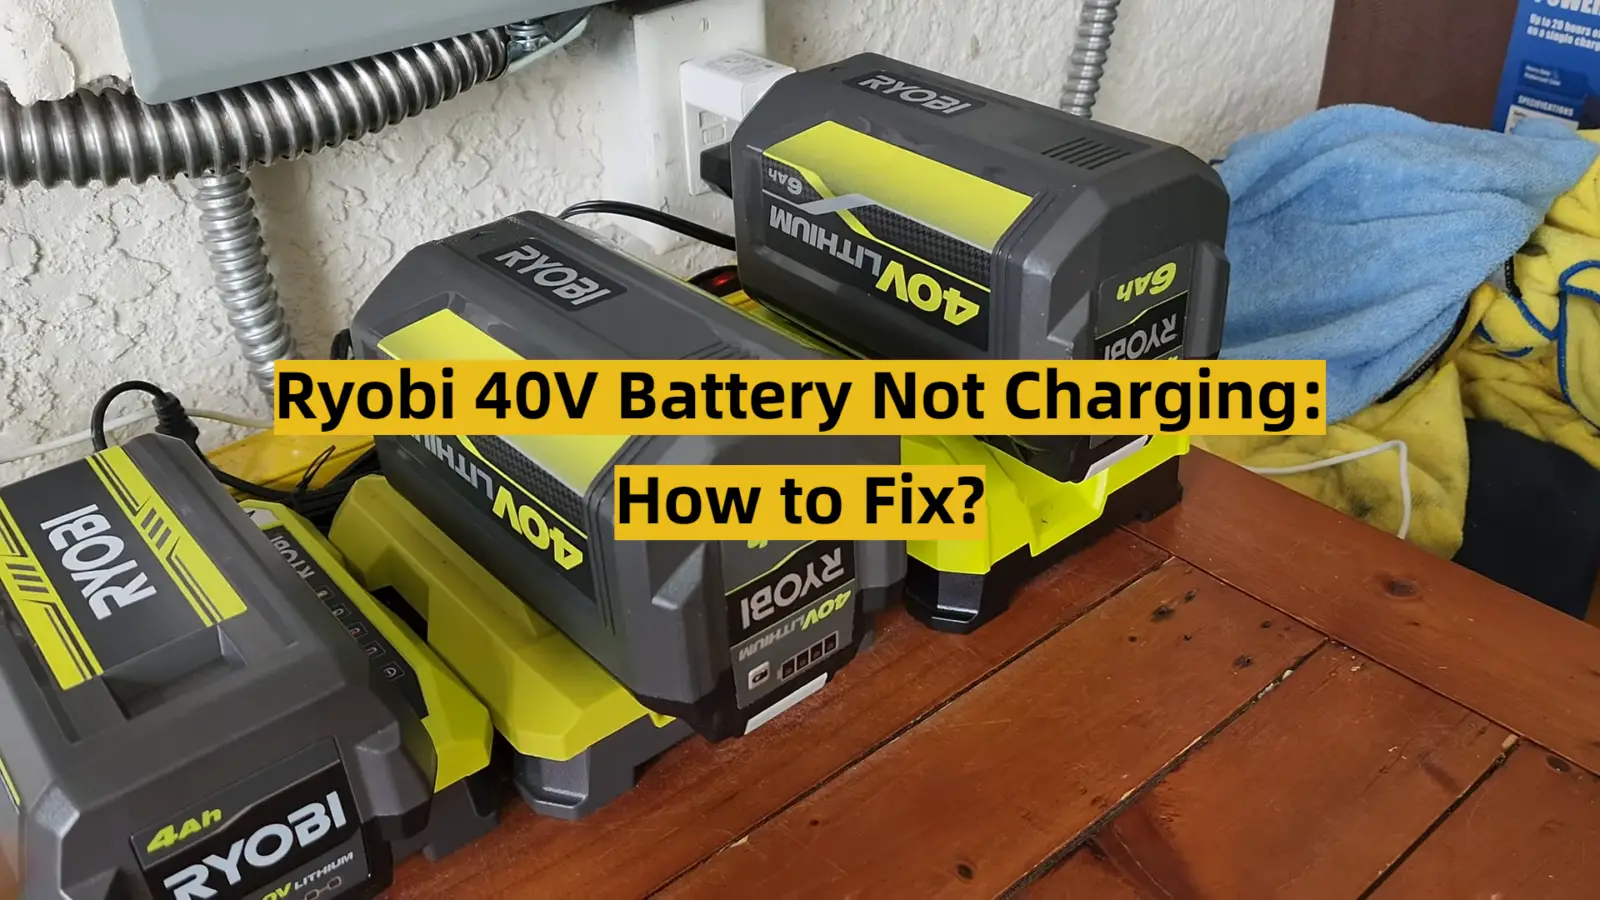 Ryobi 40V Battery Not Charging: How to Fix?